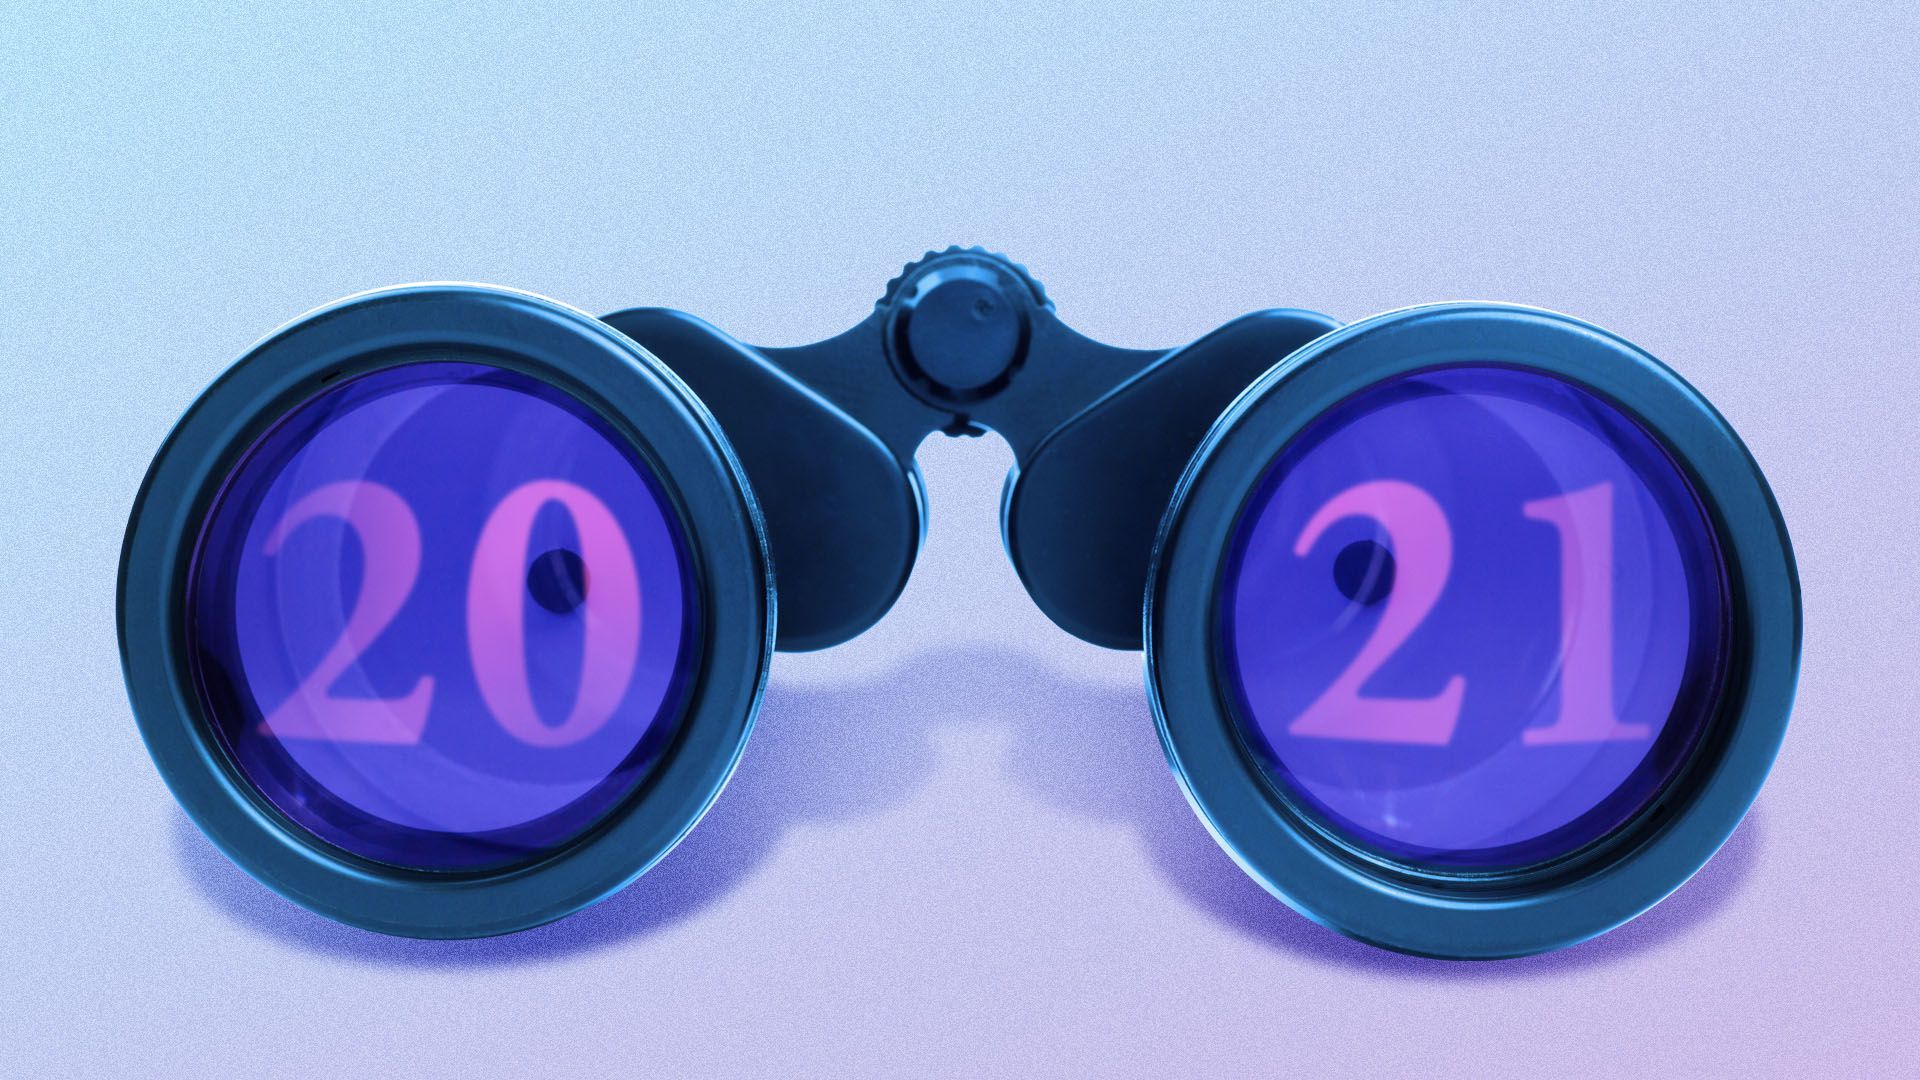 Illustration of binoculars with 2021 reflected in the lenses